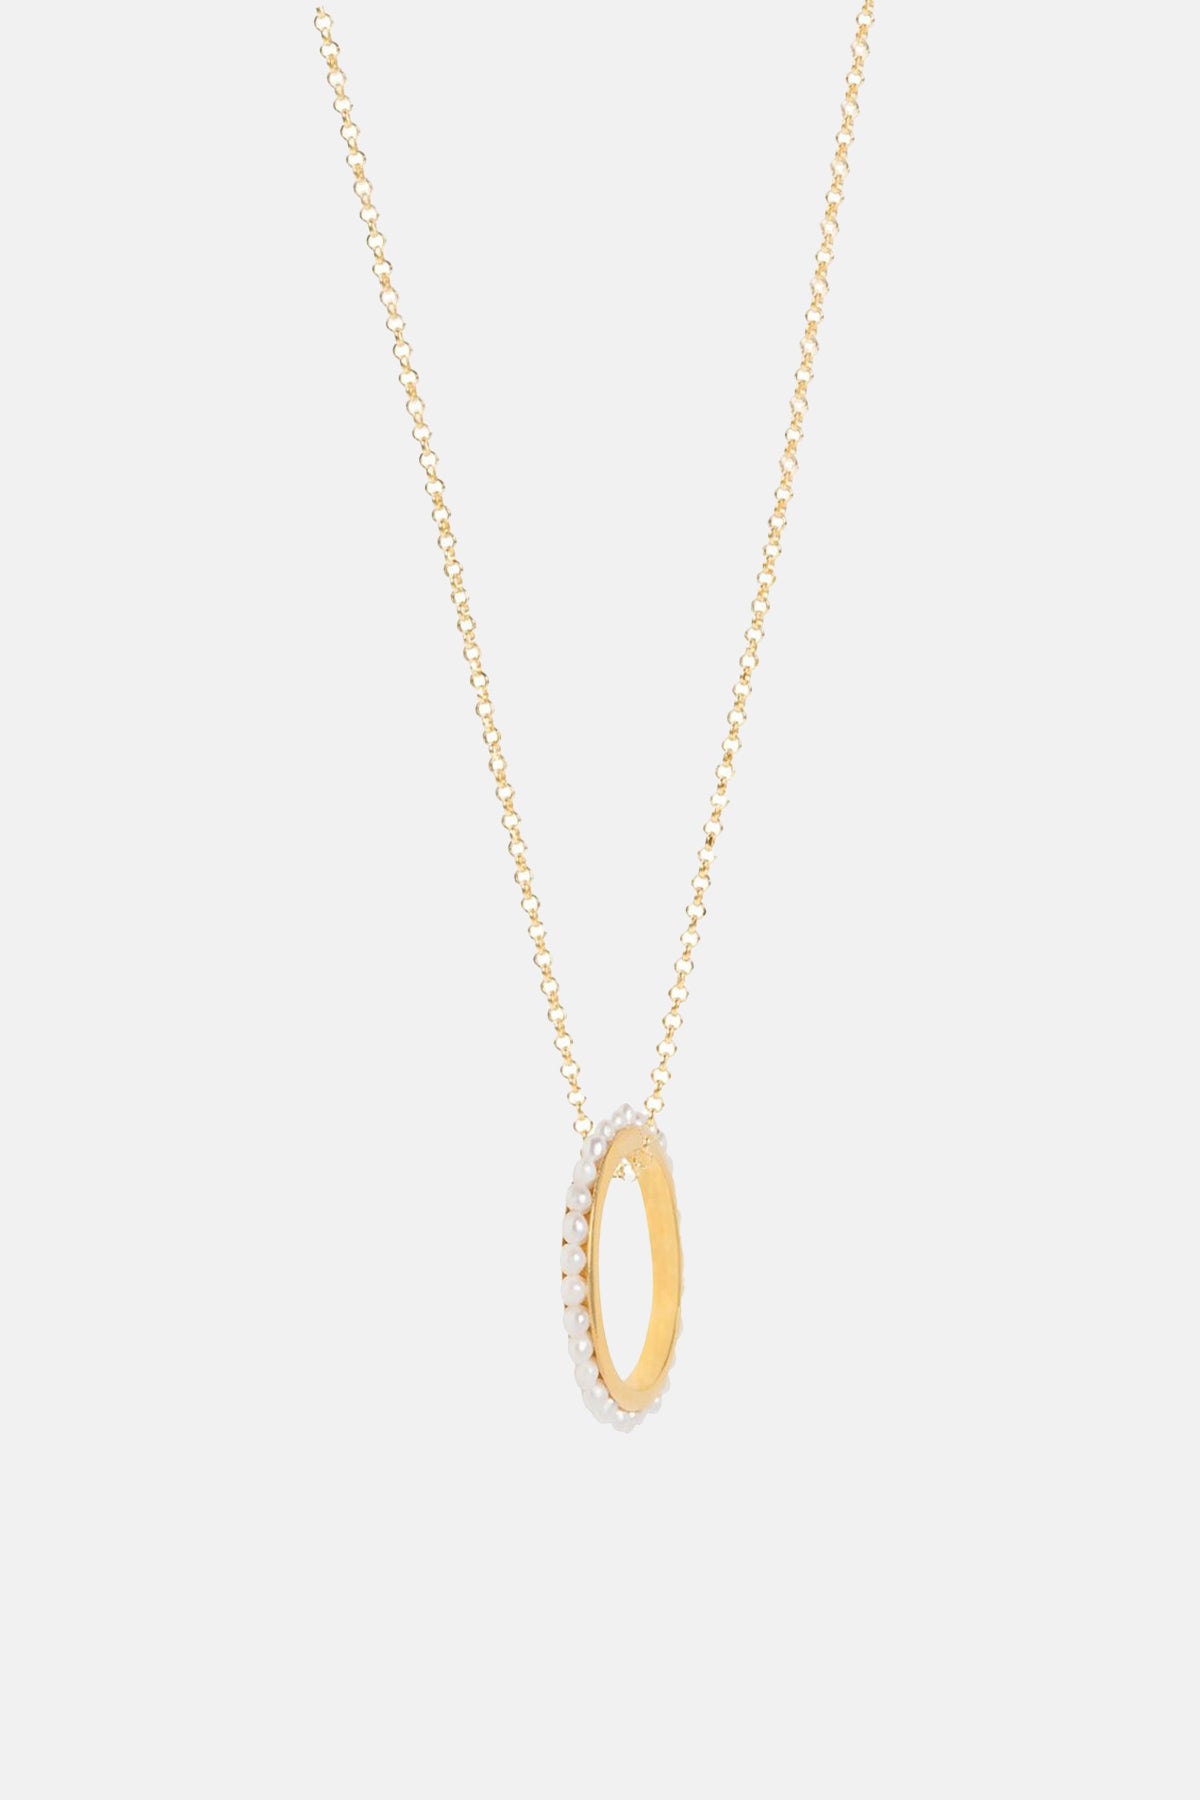 THIN NECKLACE "LUNA OVAL PEARLS" GOLD/WHITE